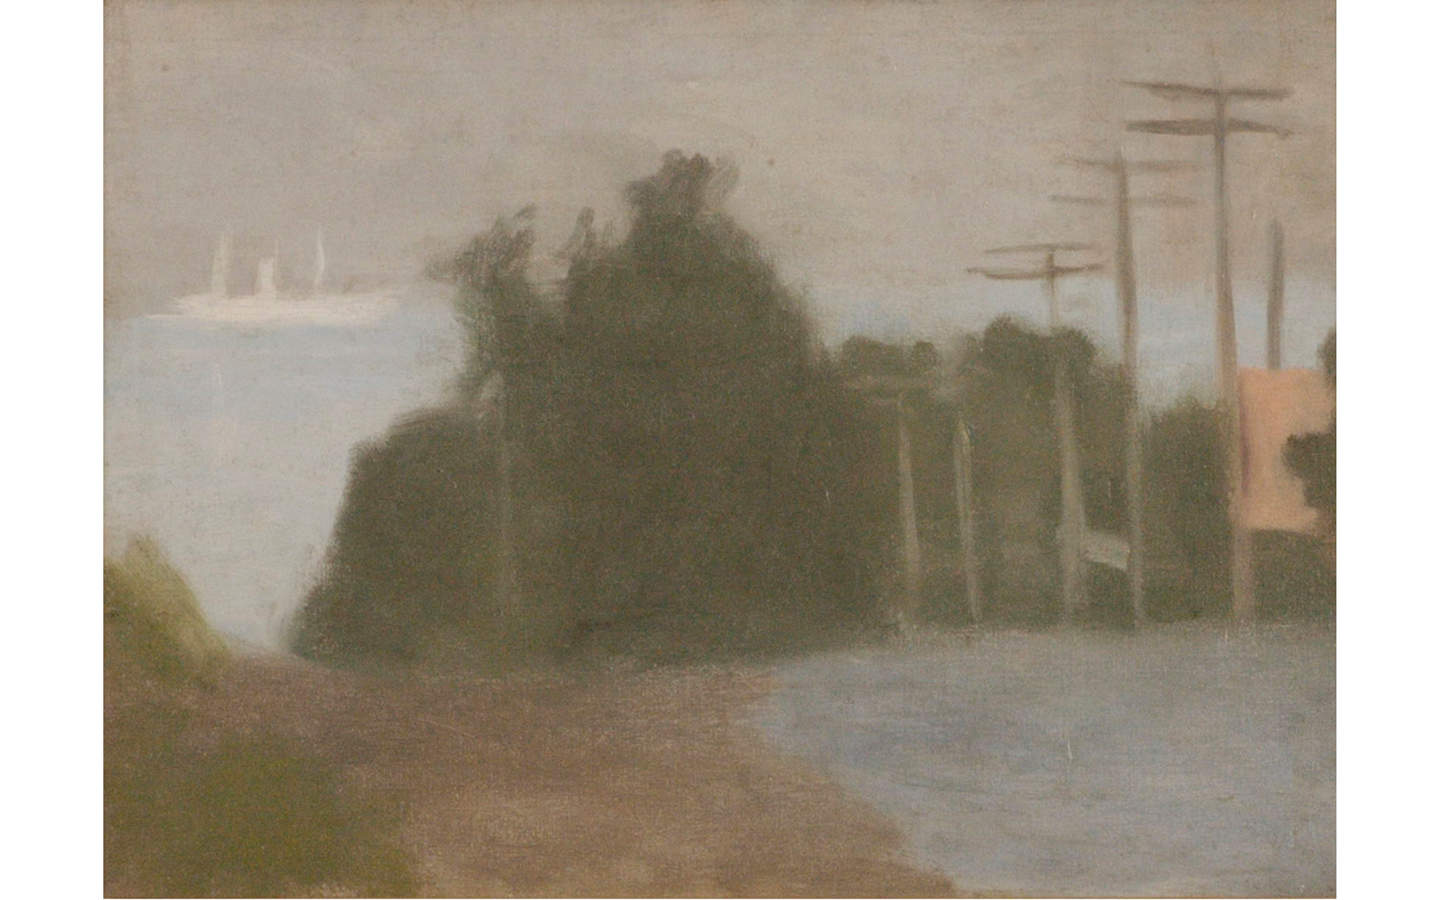 Painting of a street with the Bay in the distance. Power poles line the right of the street, trees are in the distance. In the bay a white ship can be seen